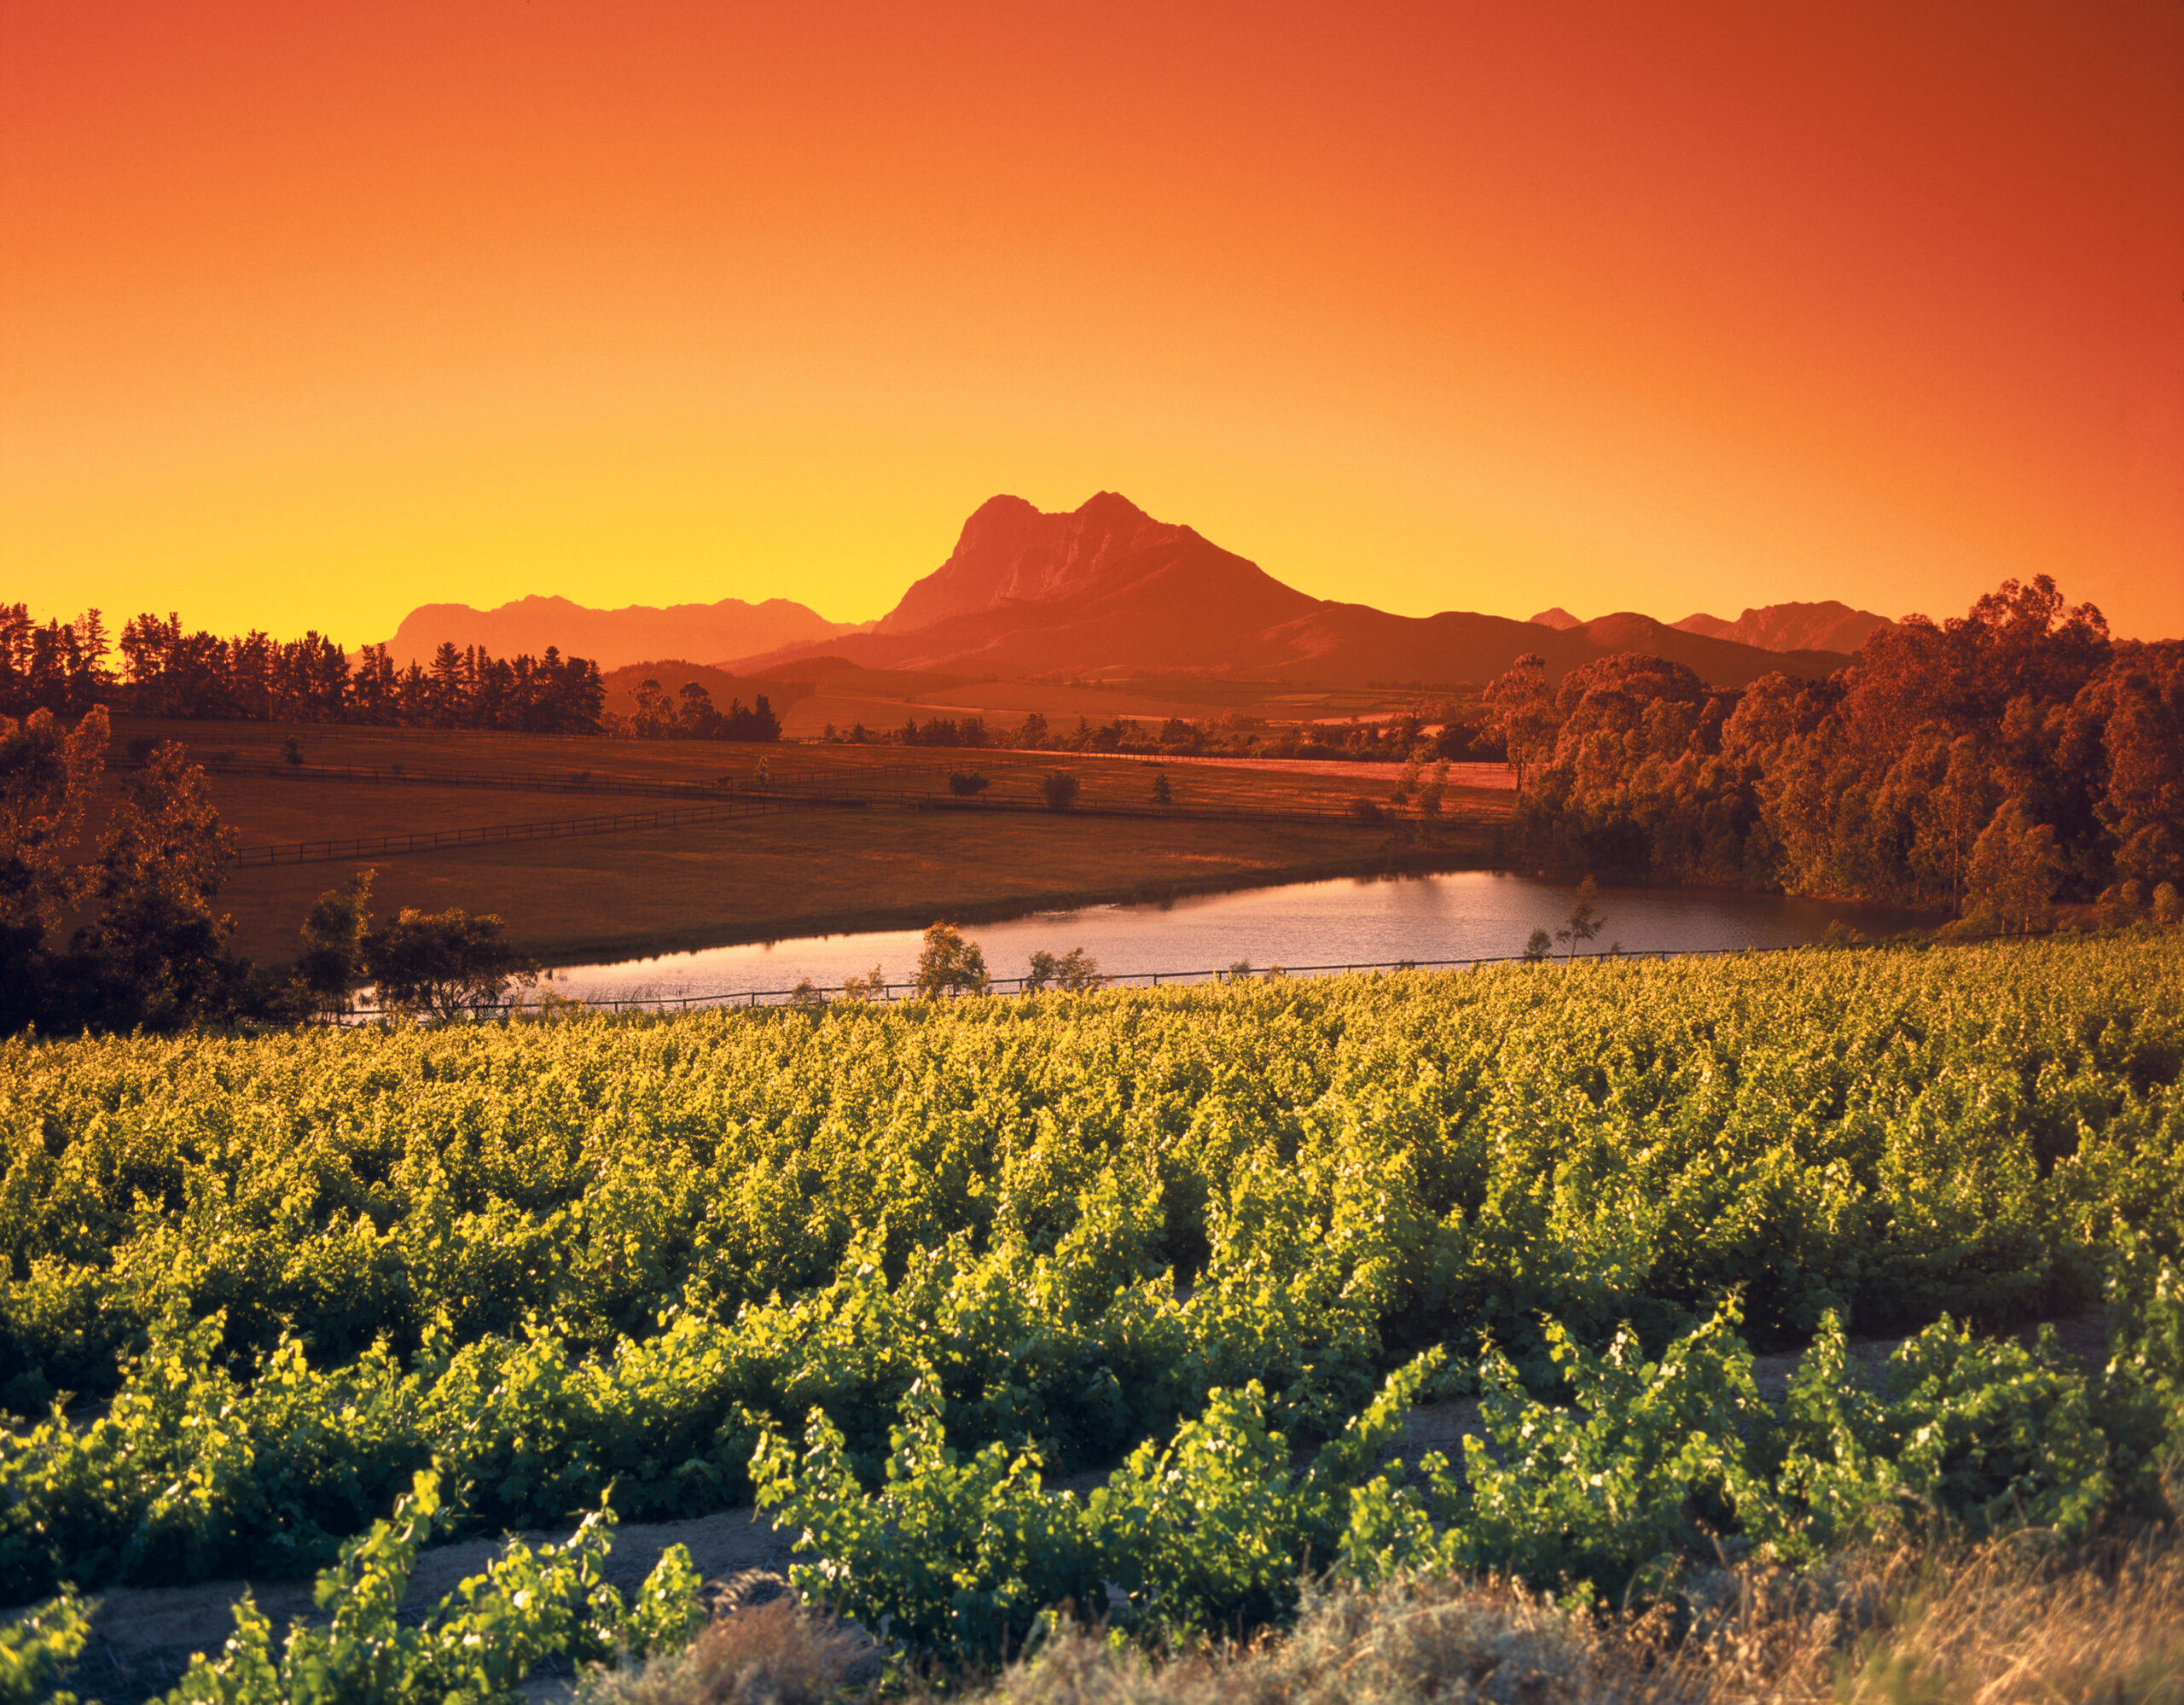 Winelands 48 hours in Cape Town